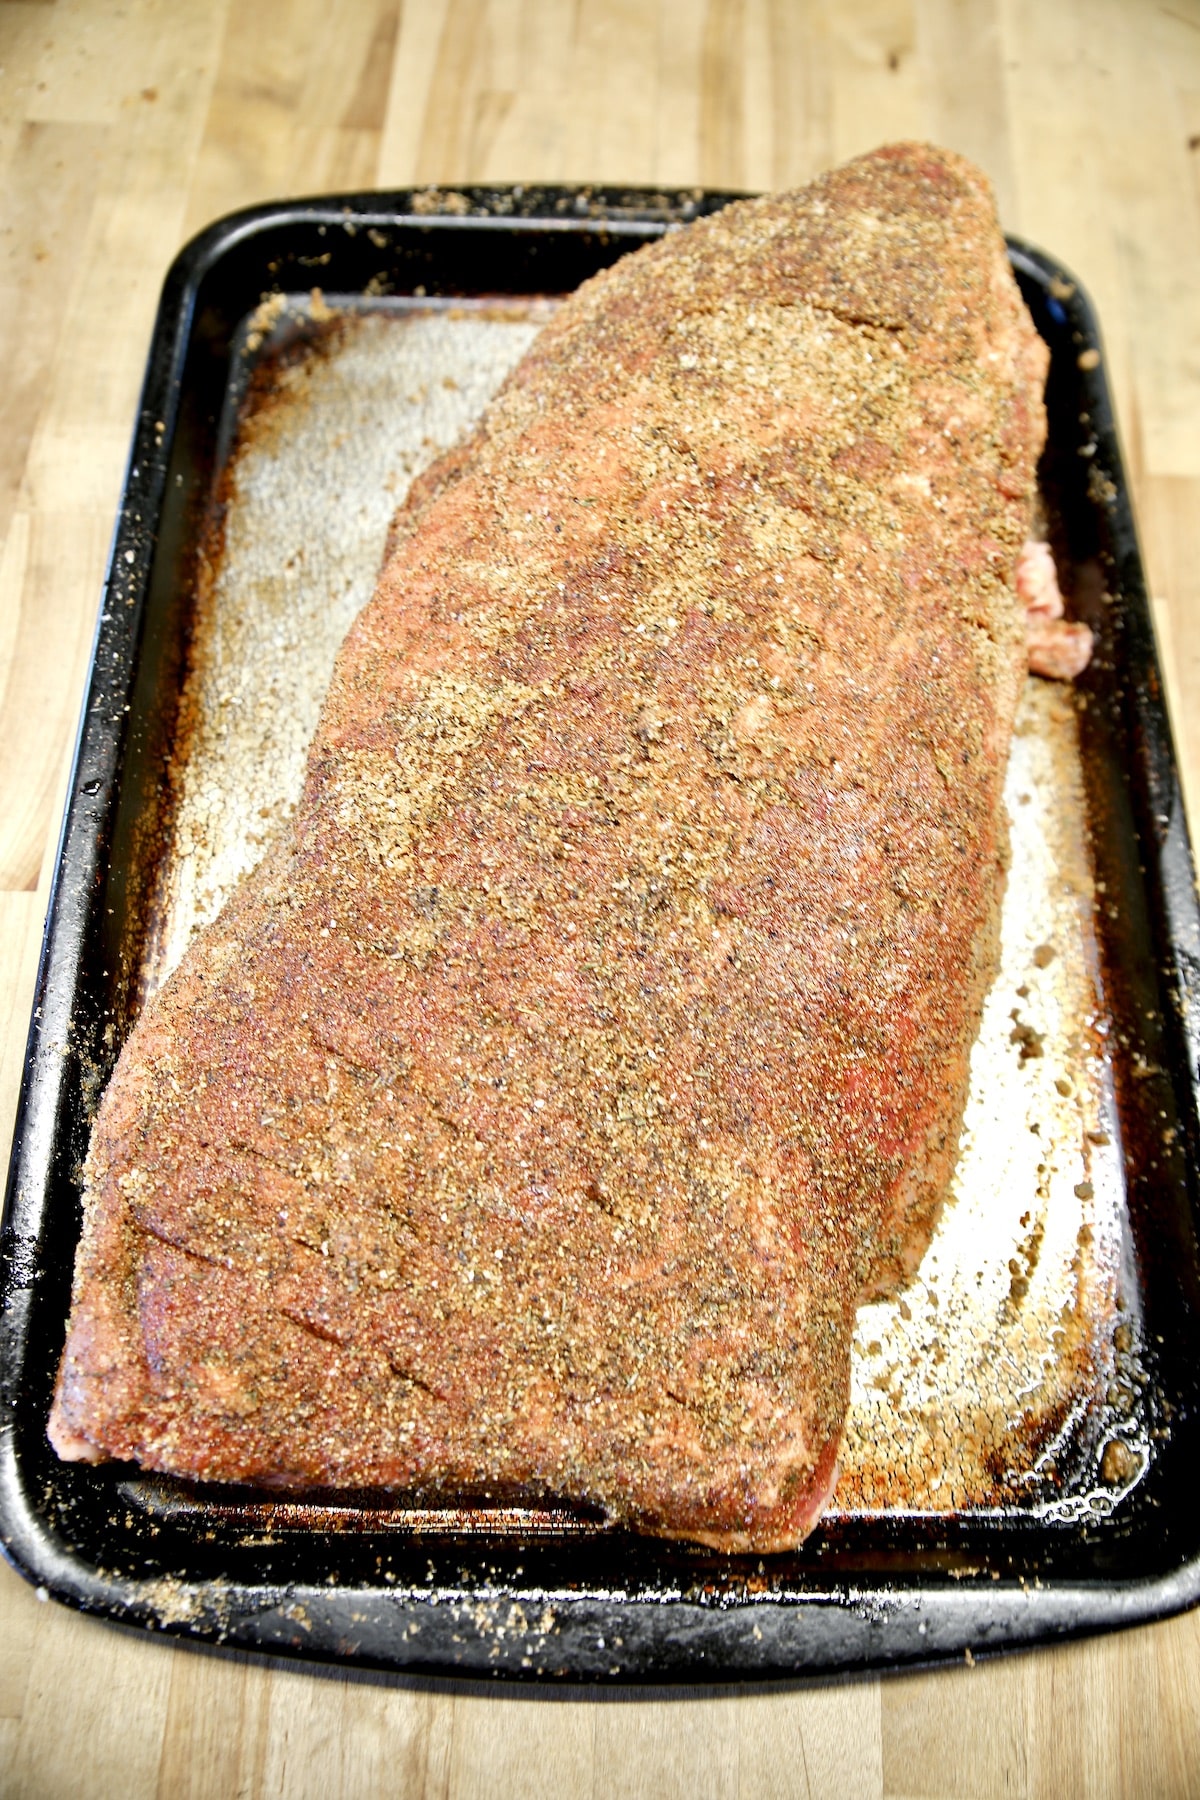 Whole brisket seasoned with dry rub ready to grill.